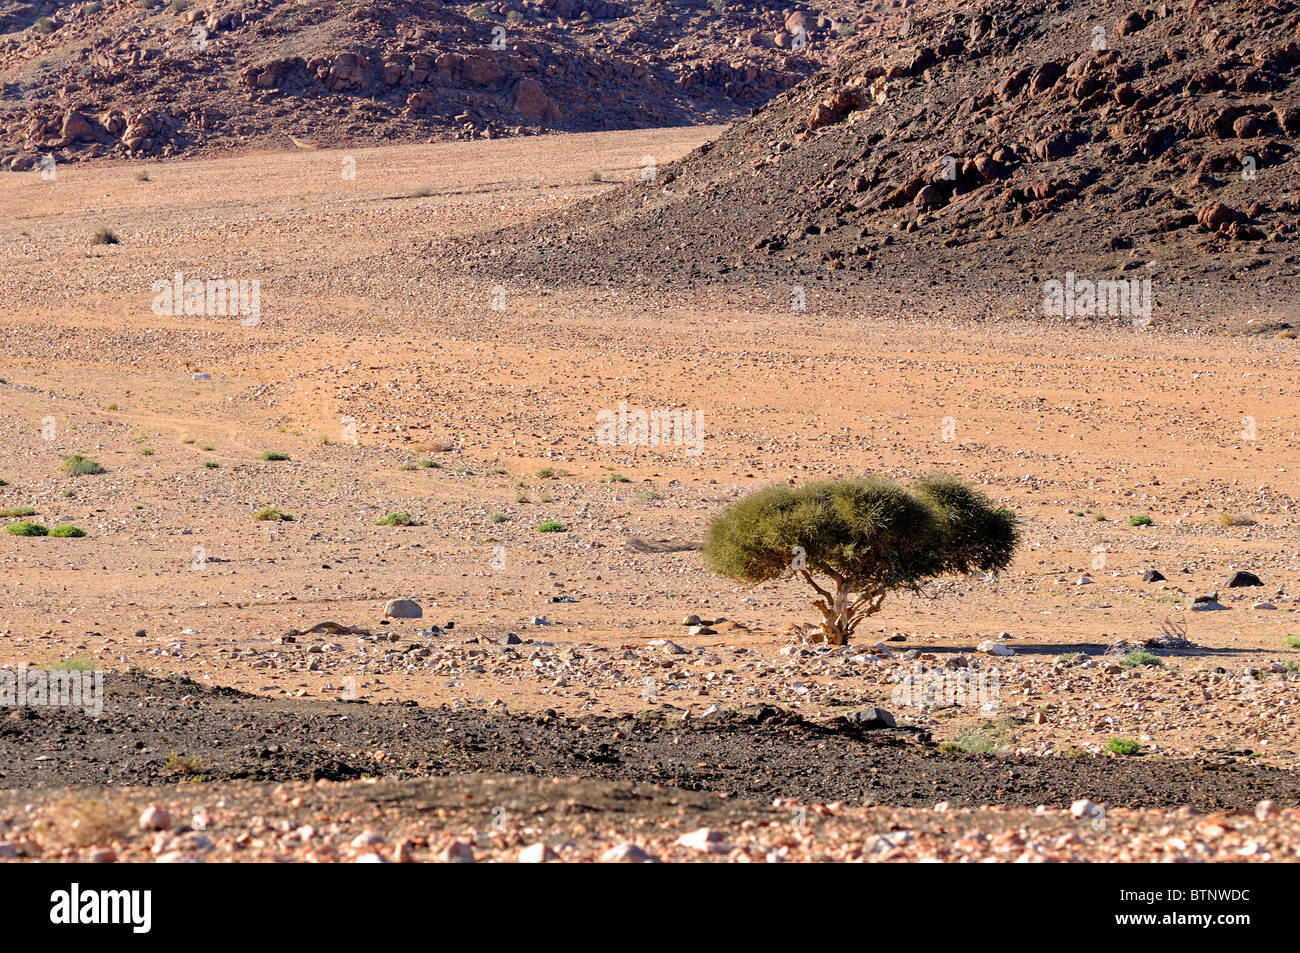 Rugged plain with Boscia albitrunca, Shepherd's tree, in foreground, Richtersveld Transfrontier National Park, South Africa Stock Photo